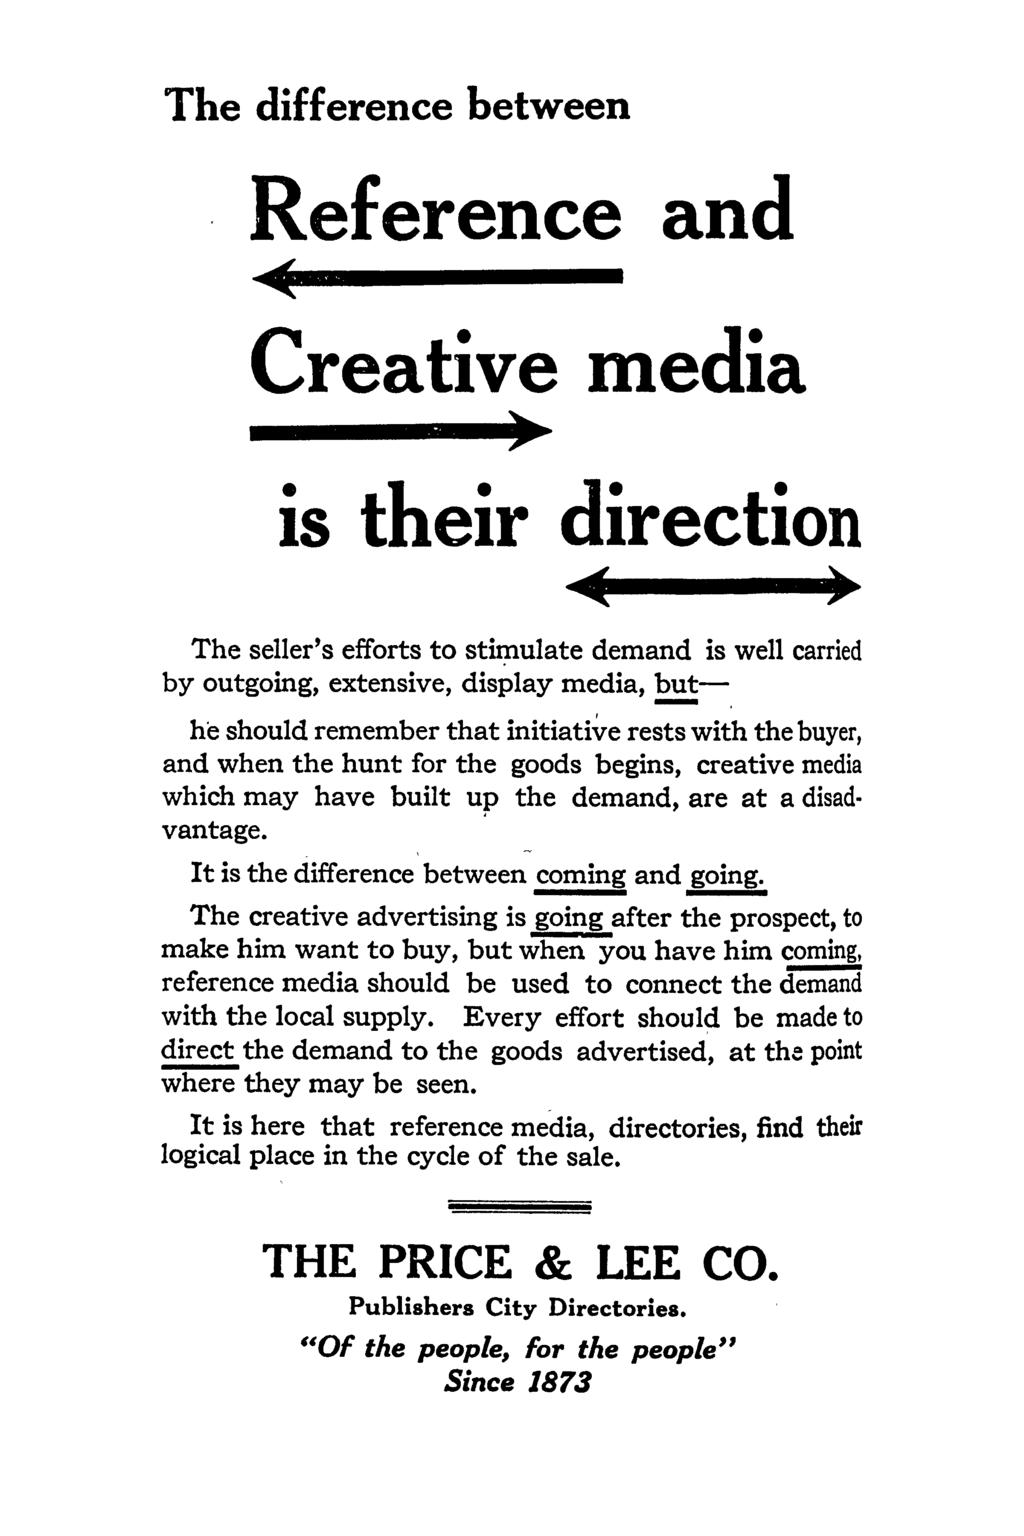 The difference between Reference and -Creative media ) is their direction ) The seller's efforts to stimulate demand is well carried by outgoing, extensive, display media, ~- he should remember that